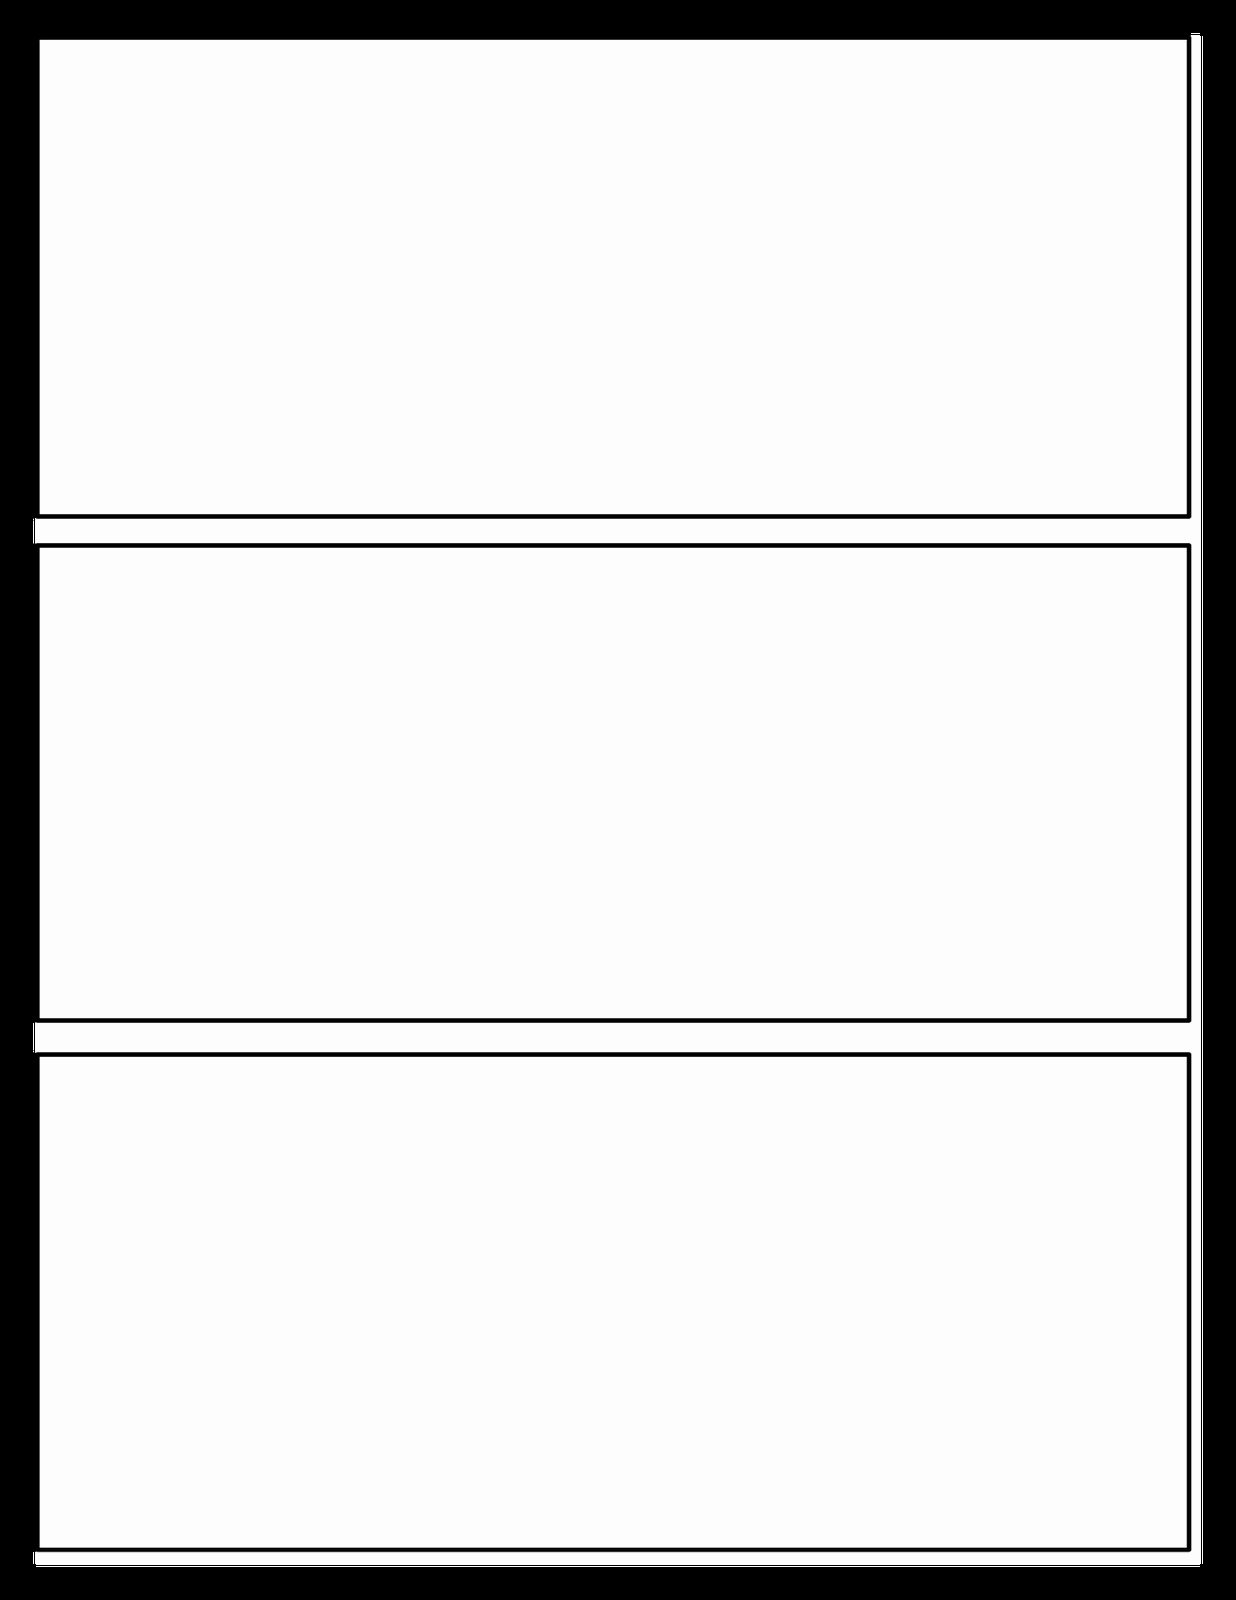 Comic Book Page Template Elegant Mrs orman S Classroom Fering Choices for Your Readers